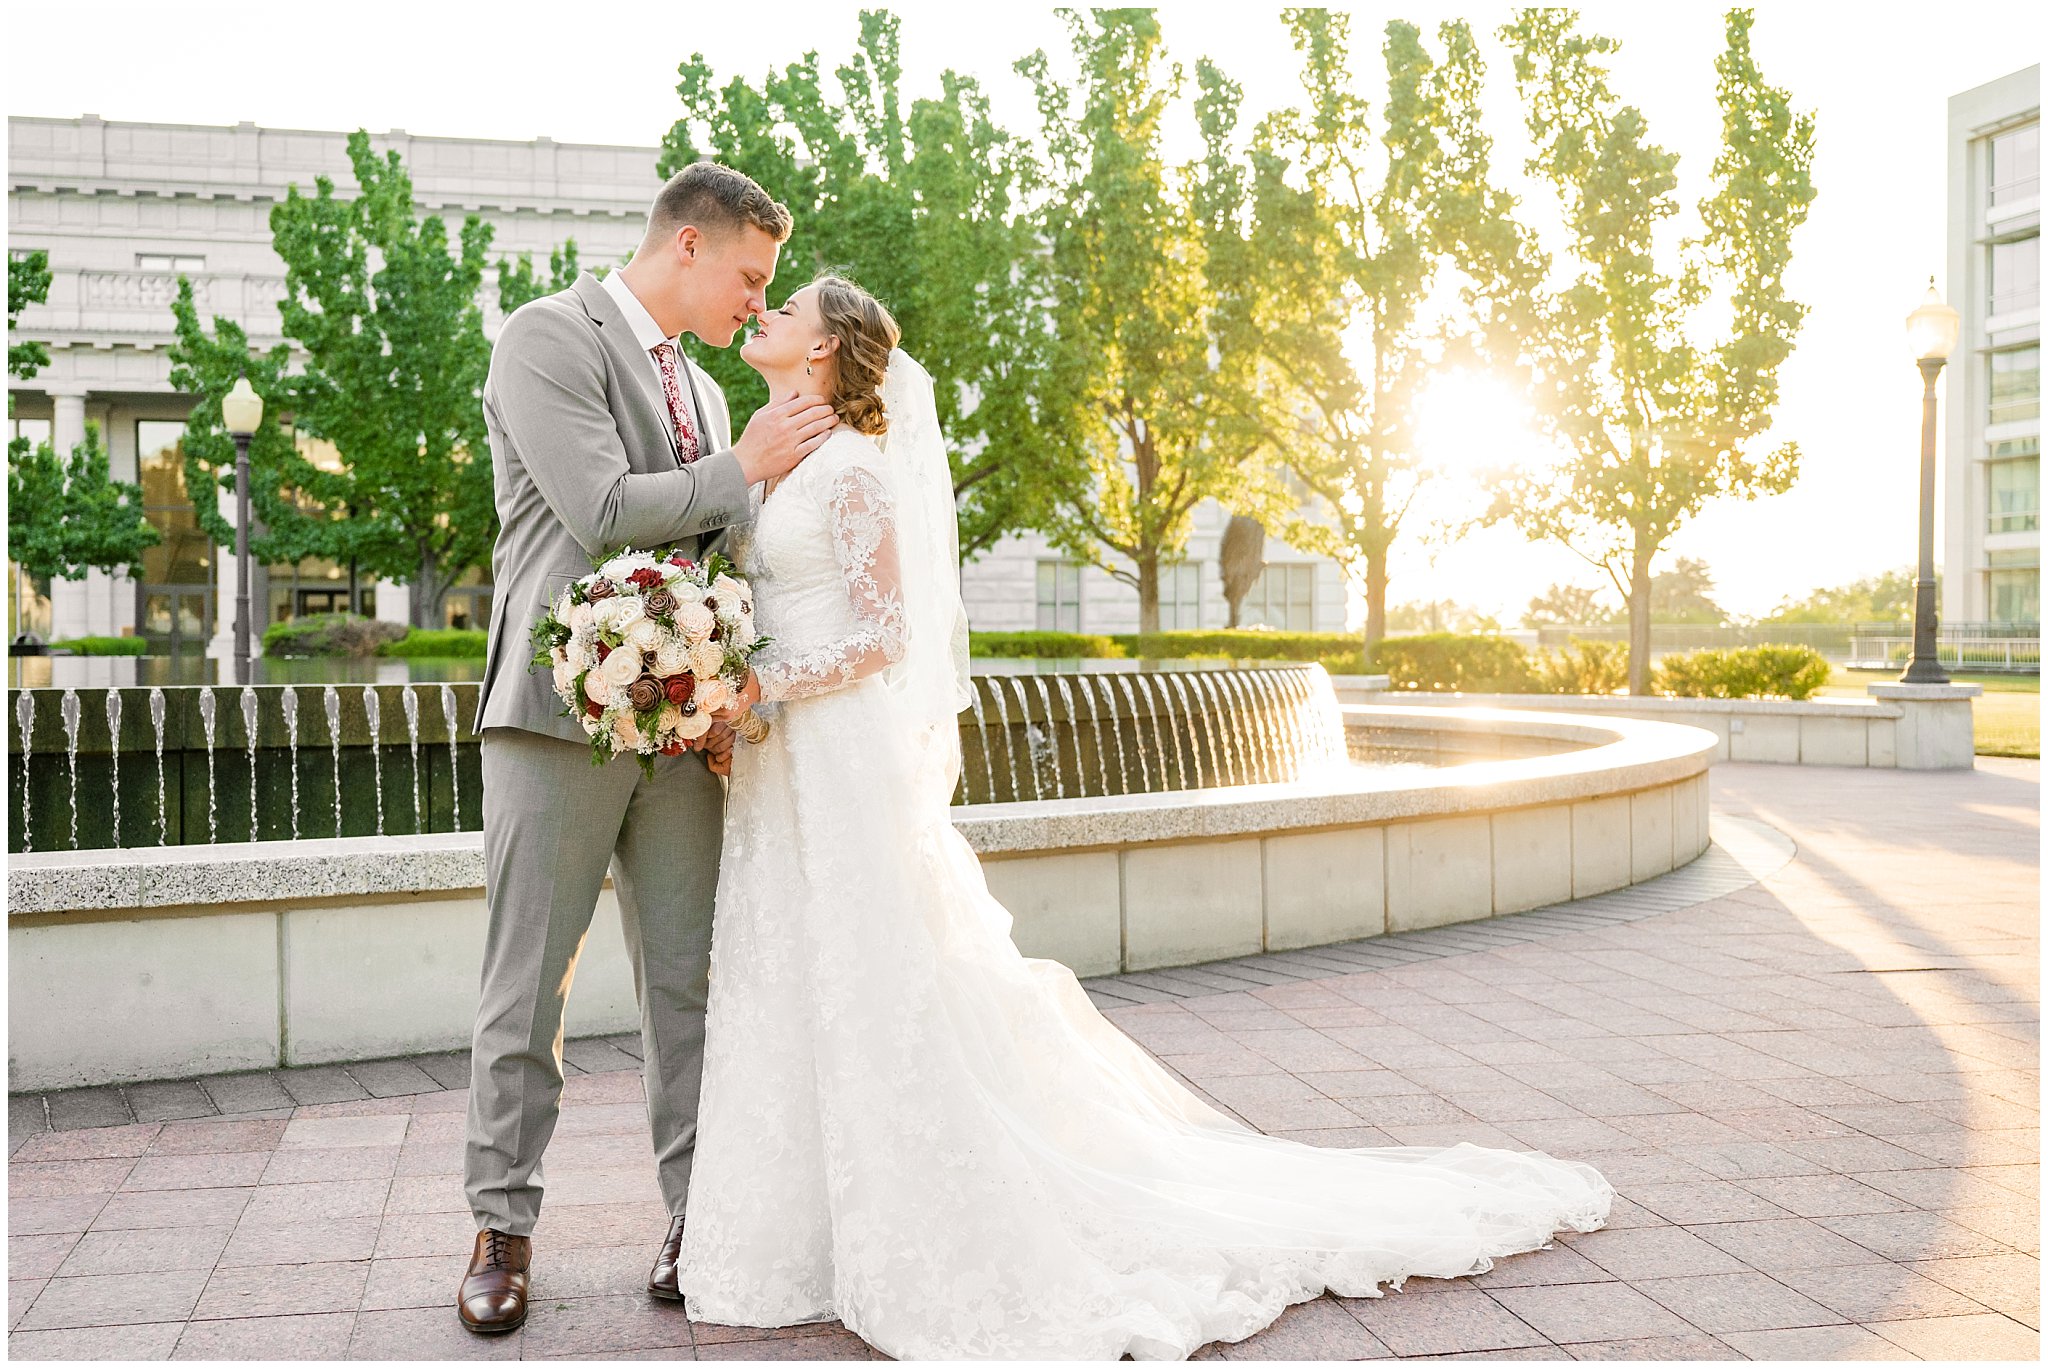 Bride and groom with long cathedral length veil sharing a romantic kiss as the sun sets | Sunset Utah State Capitol Wedding Formal Session | Jessie and Dallin Photography